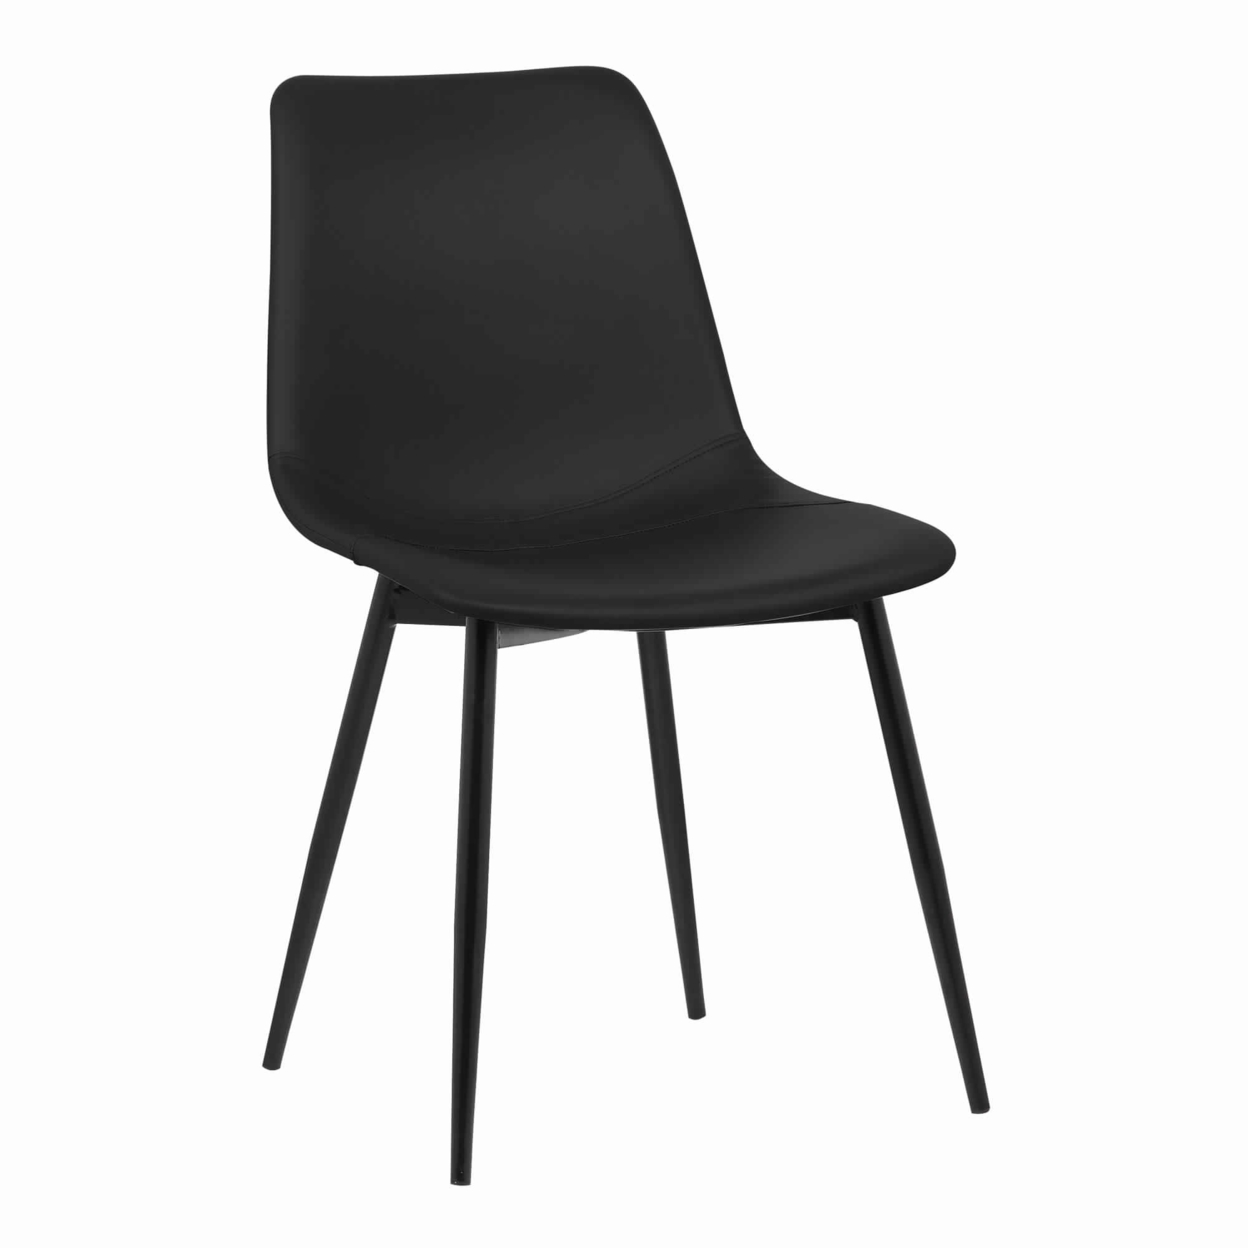 Leatherette Dining Chair With Bucket Seat And Metal Legs, Black- Saltoro Sherpi